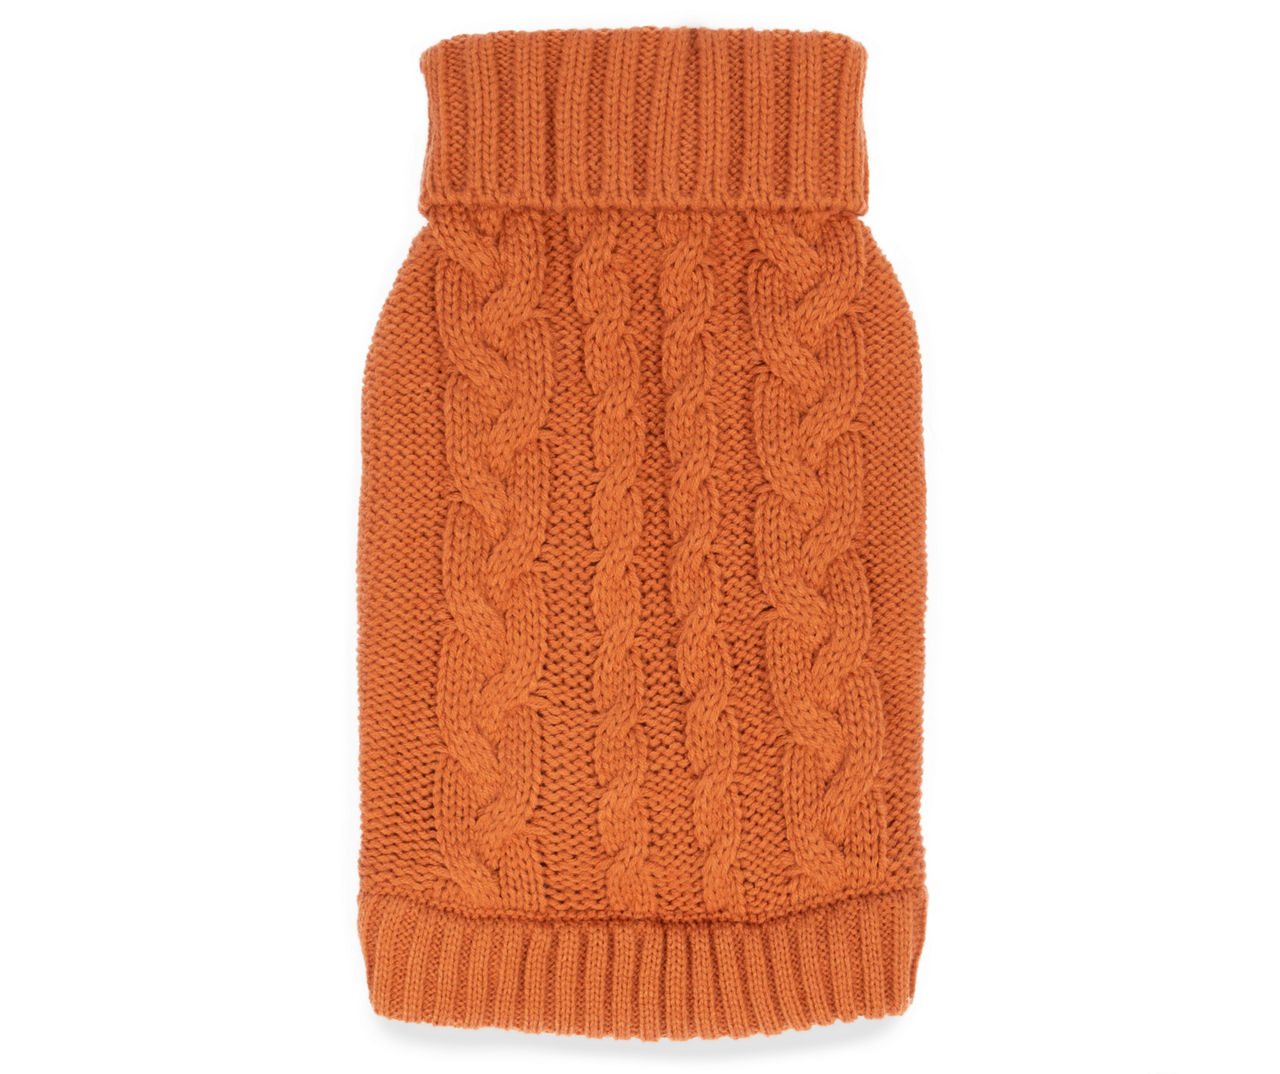 Pet X-Large Rust Chunky Cable Knit Sweater